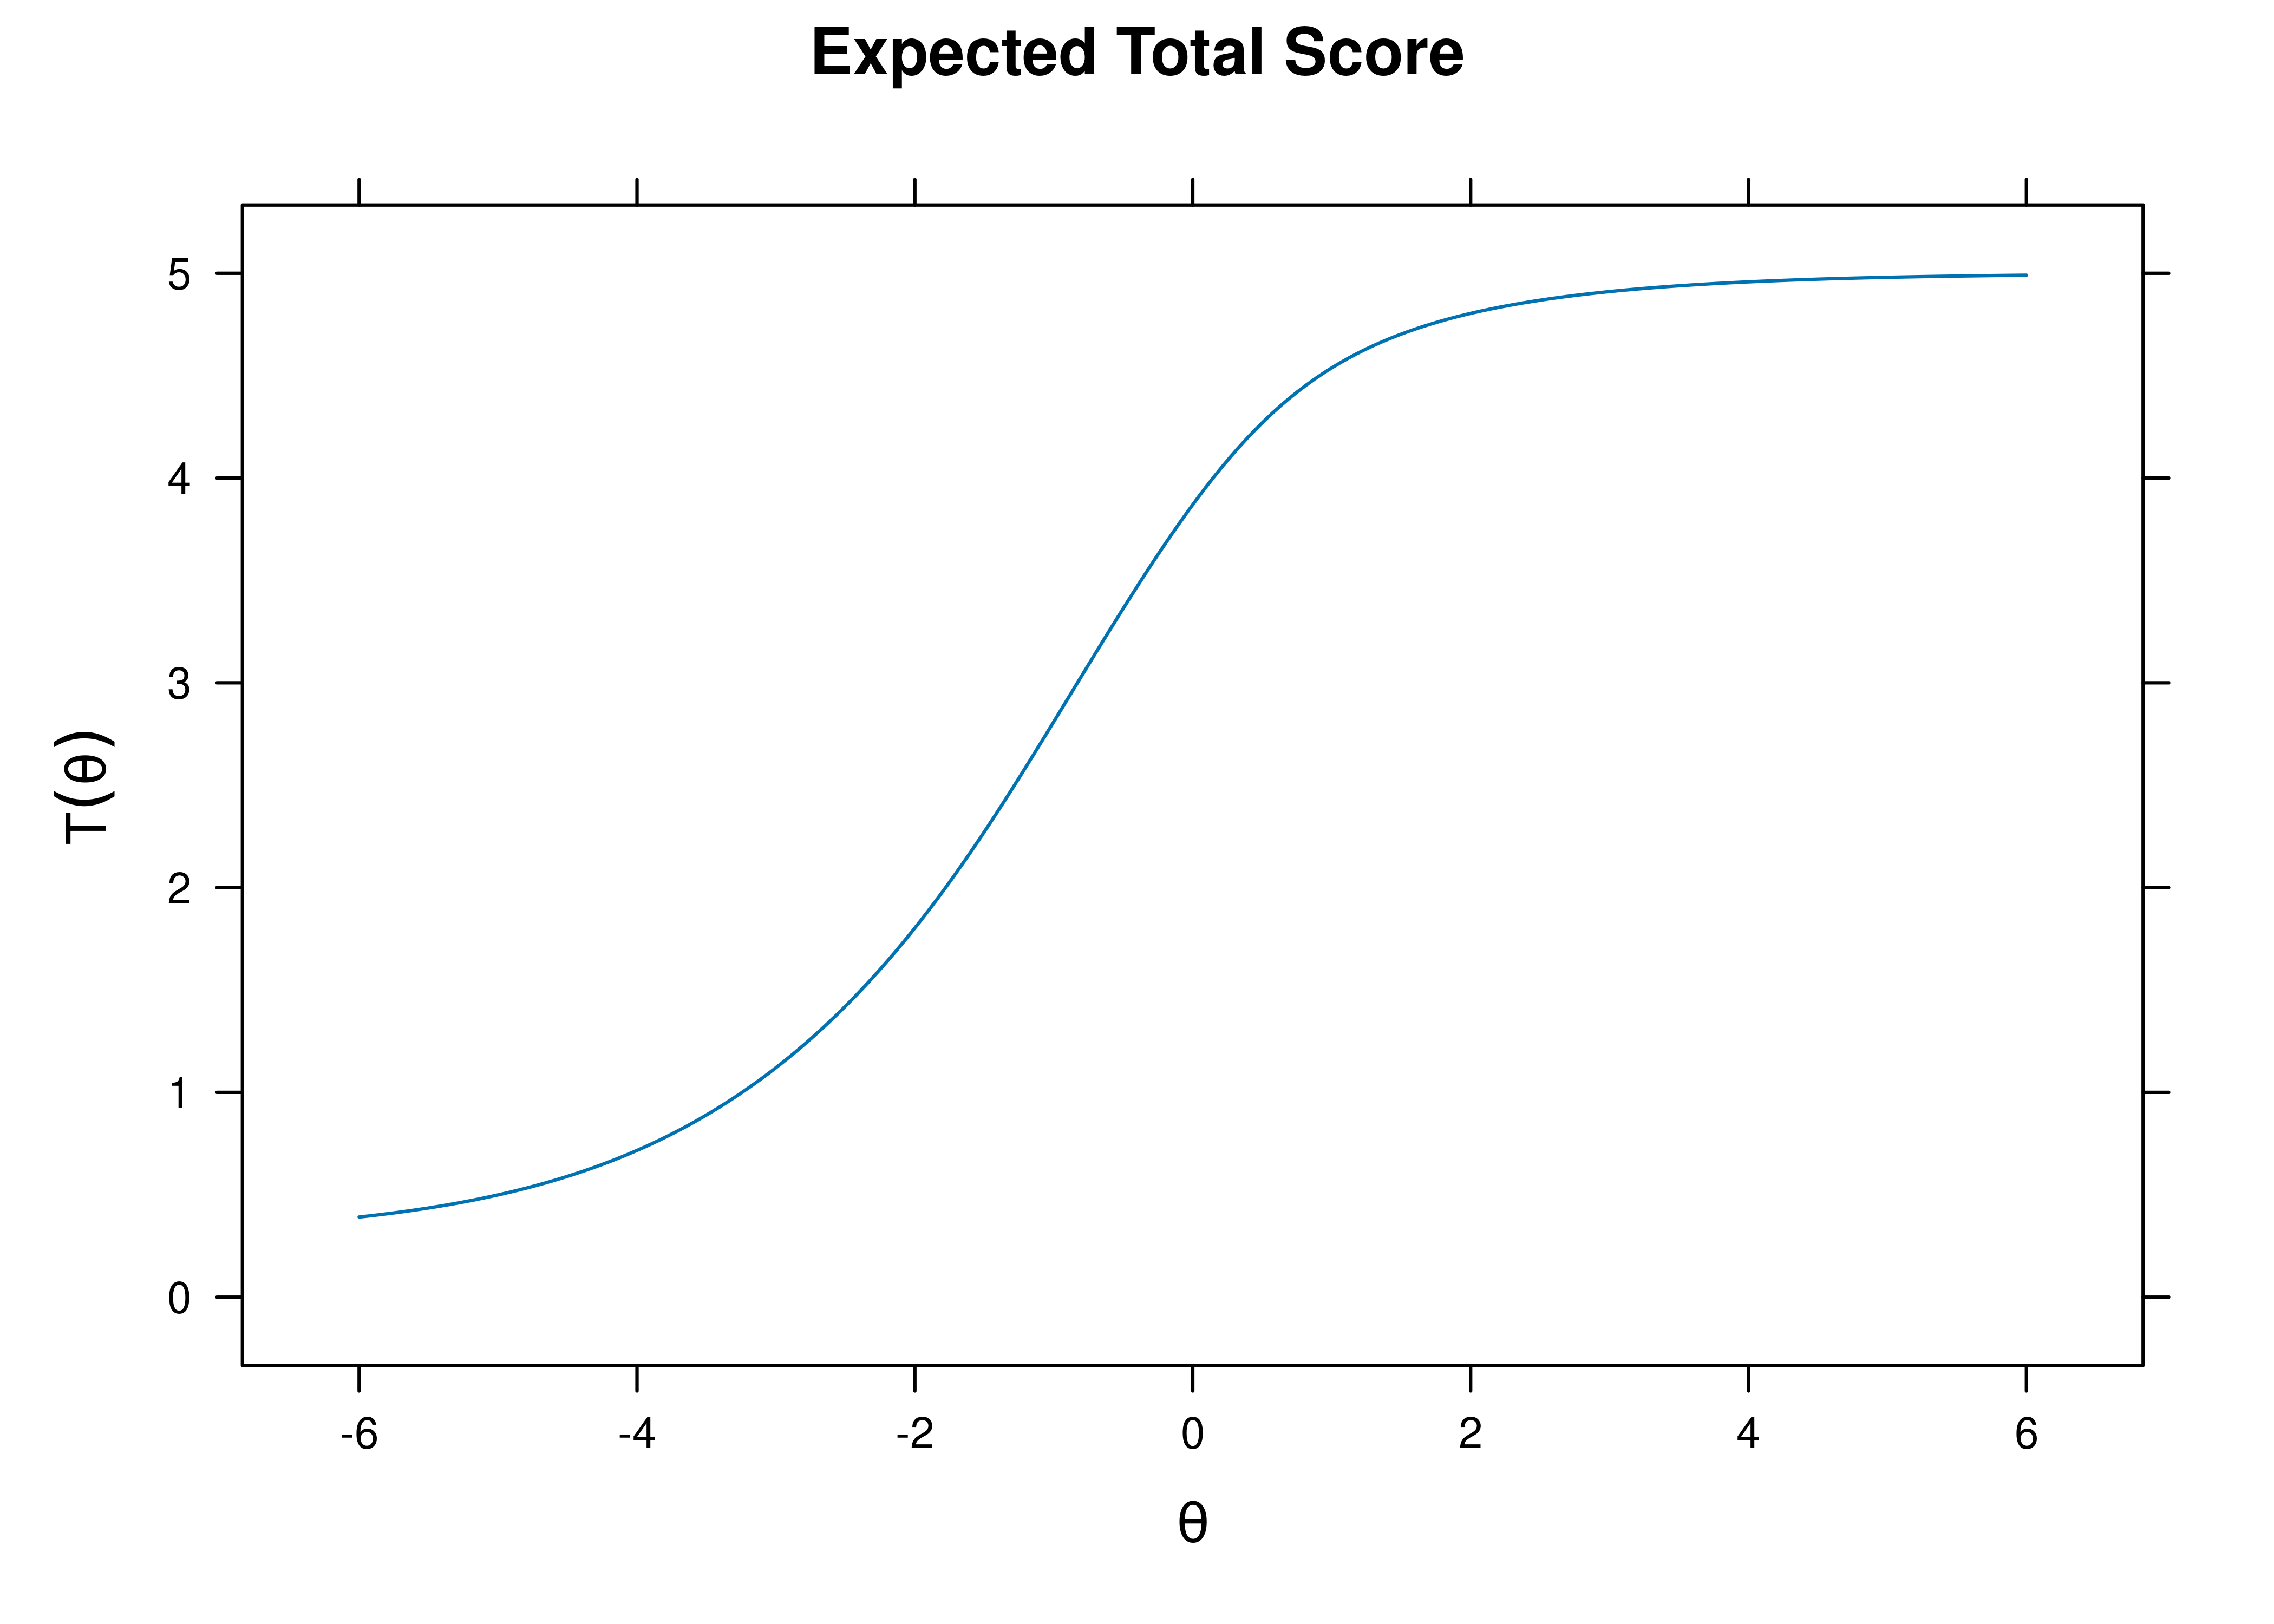 Test Characteristic Curve From Three-Parameter Logistic Item Response Theory Model.